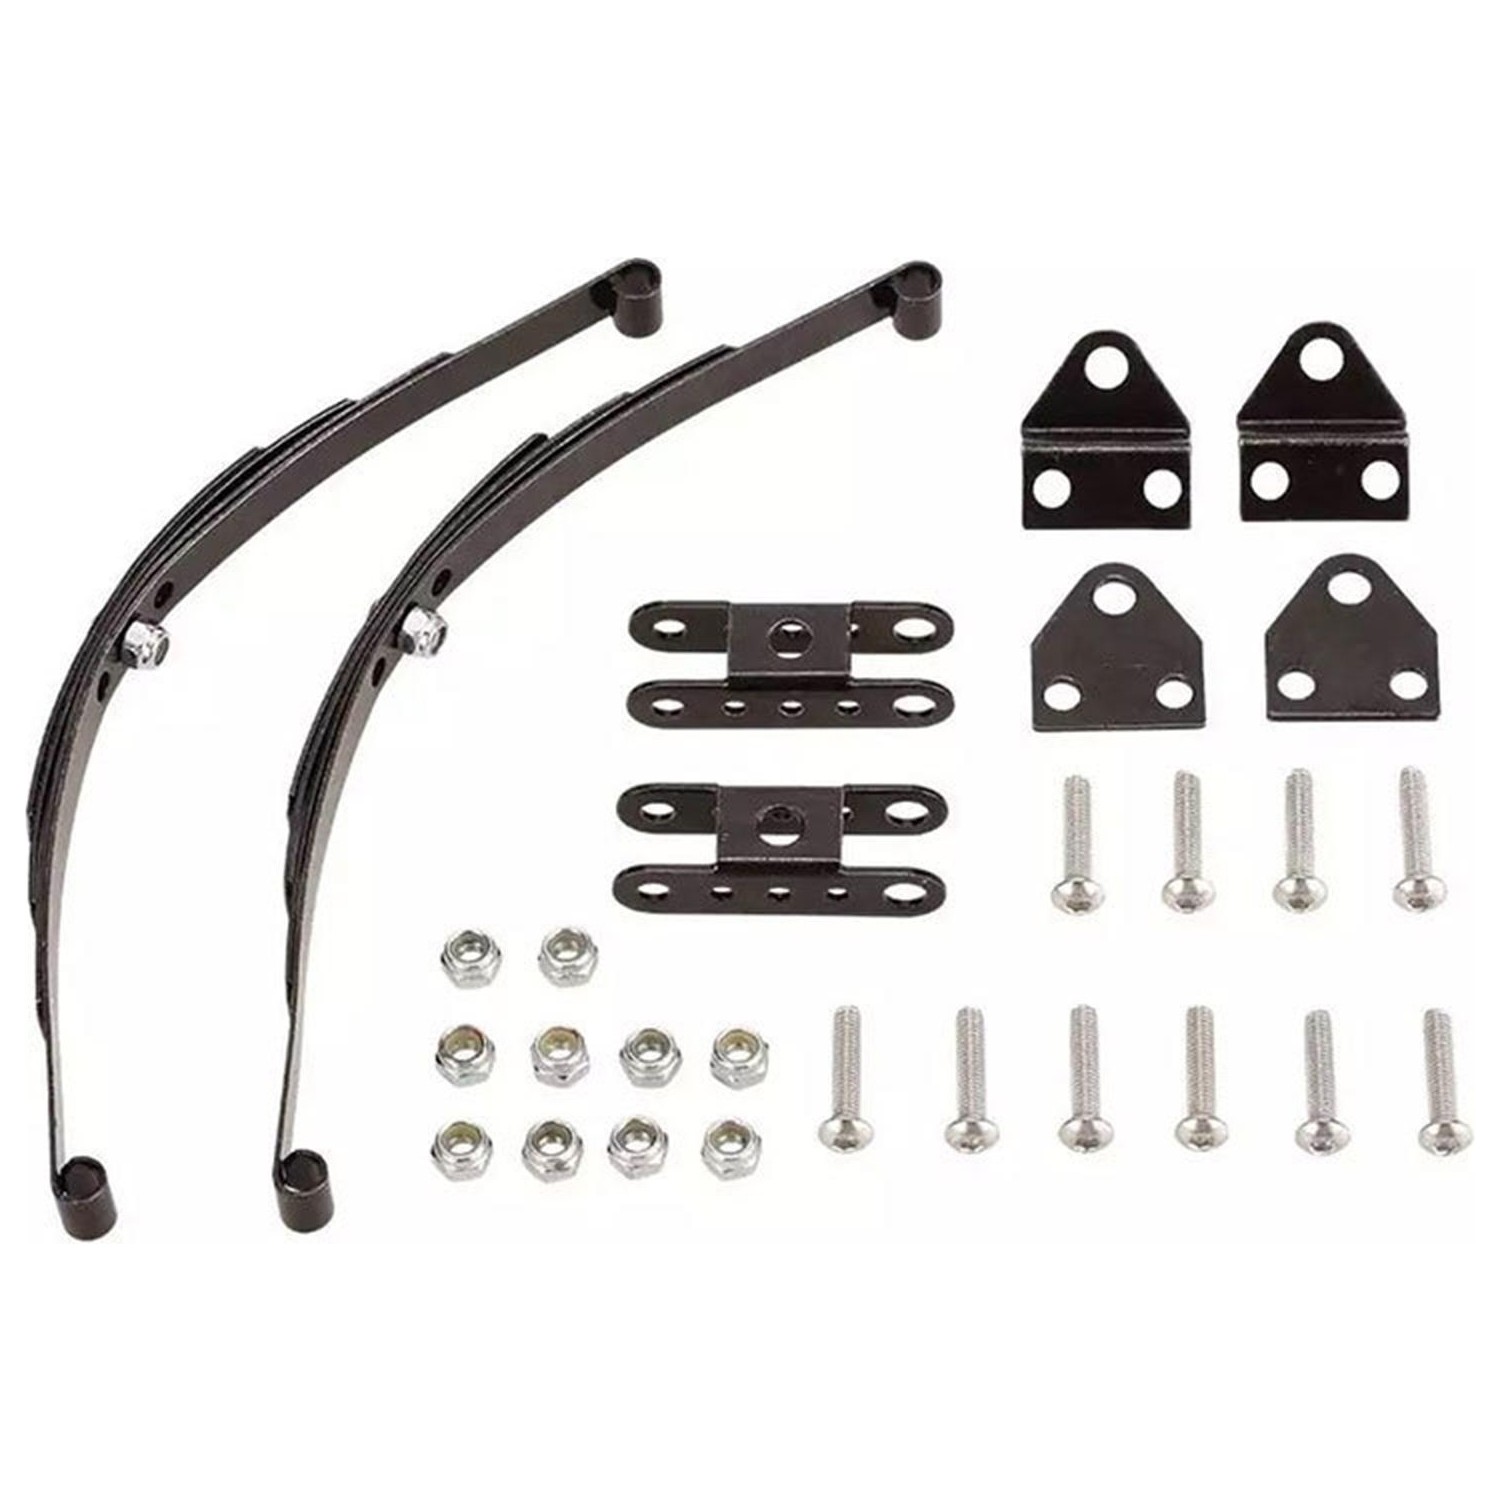 RC4WD Leaf Type Spring Suspension Set For Axial D90 RC 4WD RC Rock Crawler Car 